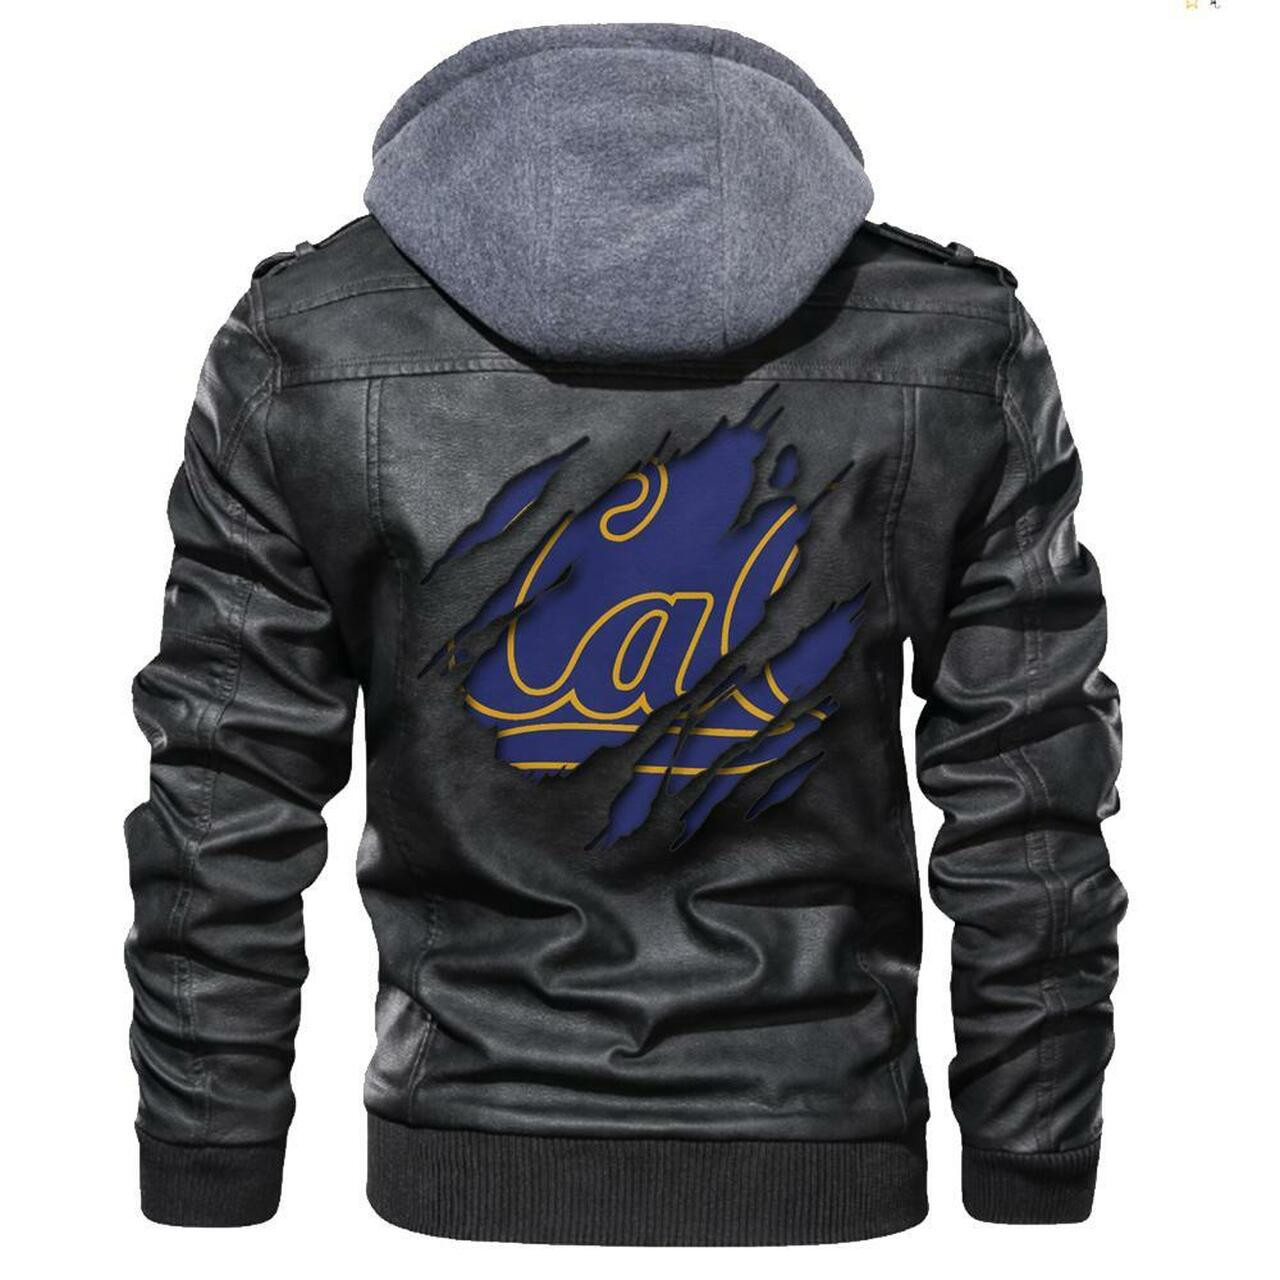 You can find Leather Jacket online at a great price 13